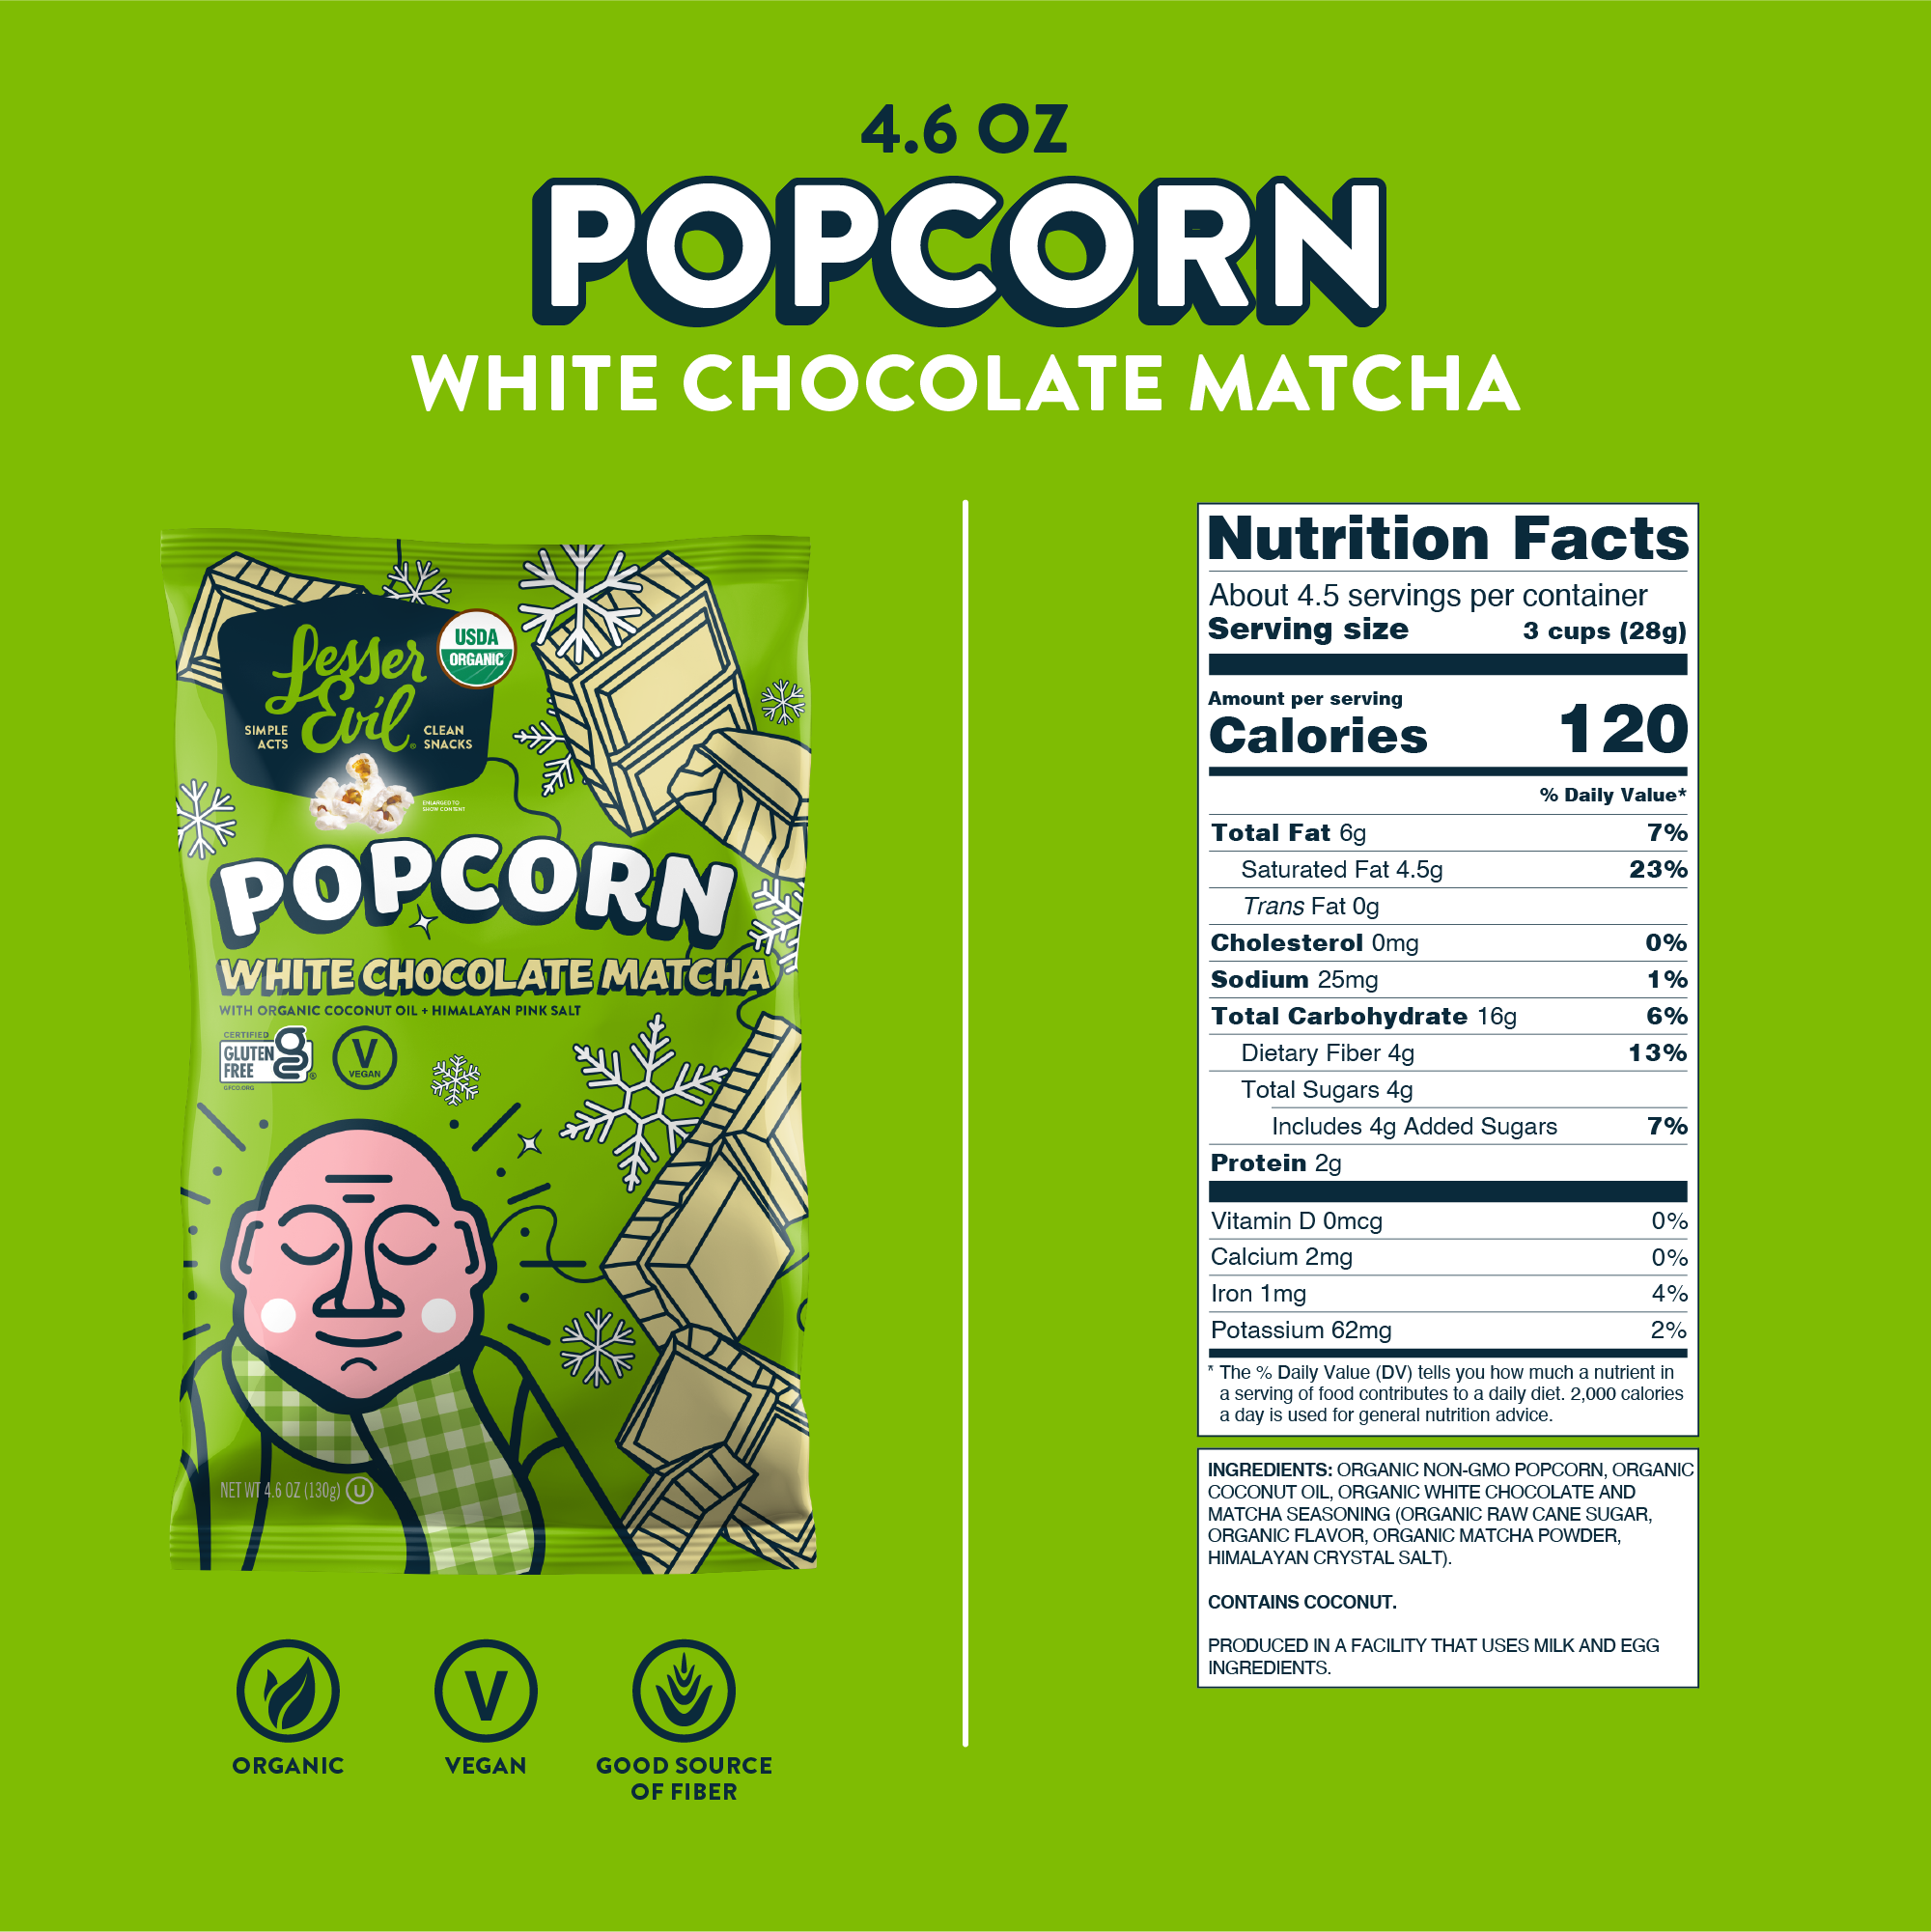 Nutrition facts for White Chocolate Matcha Popcorn